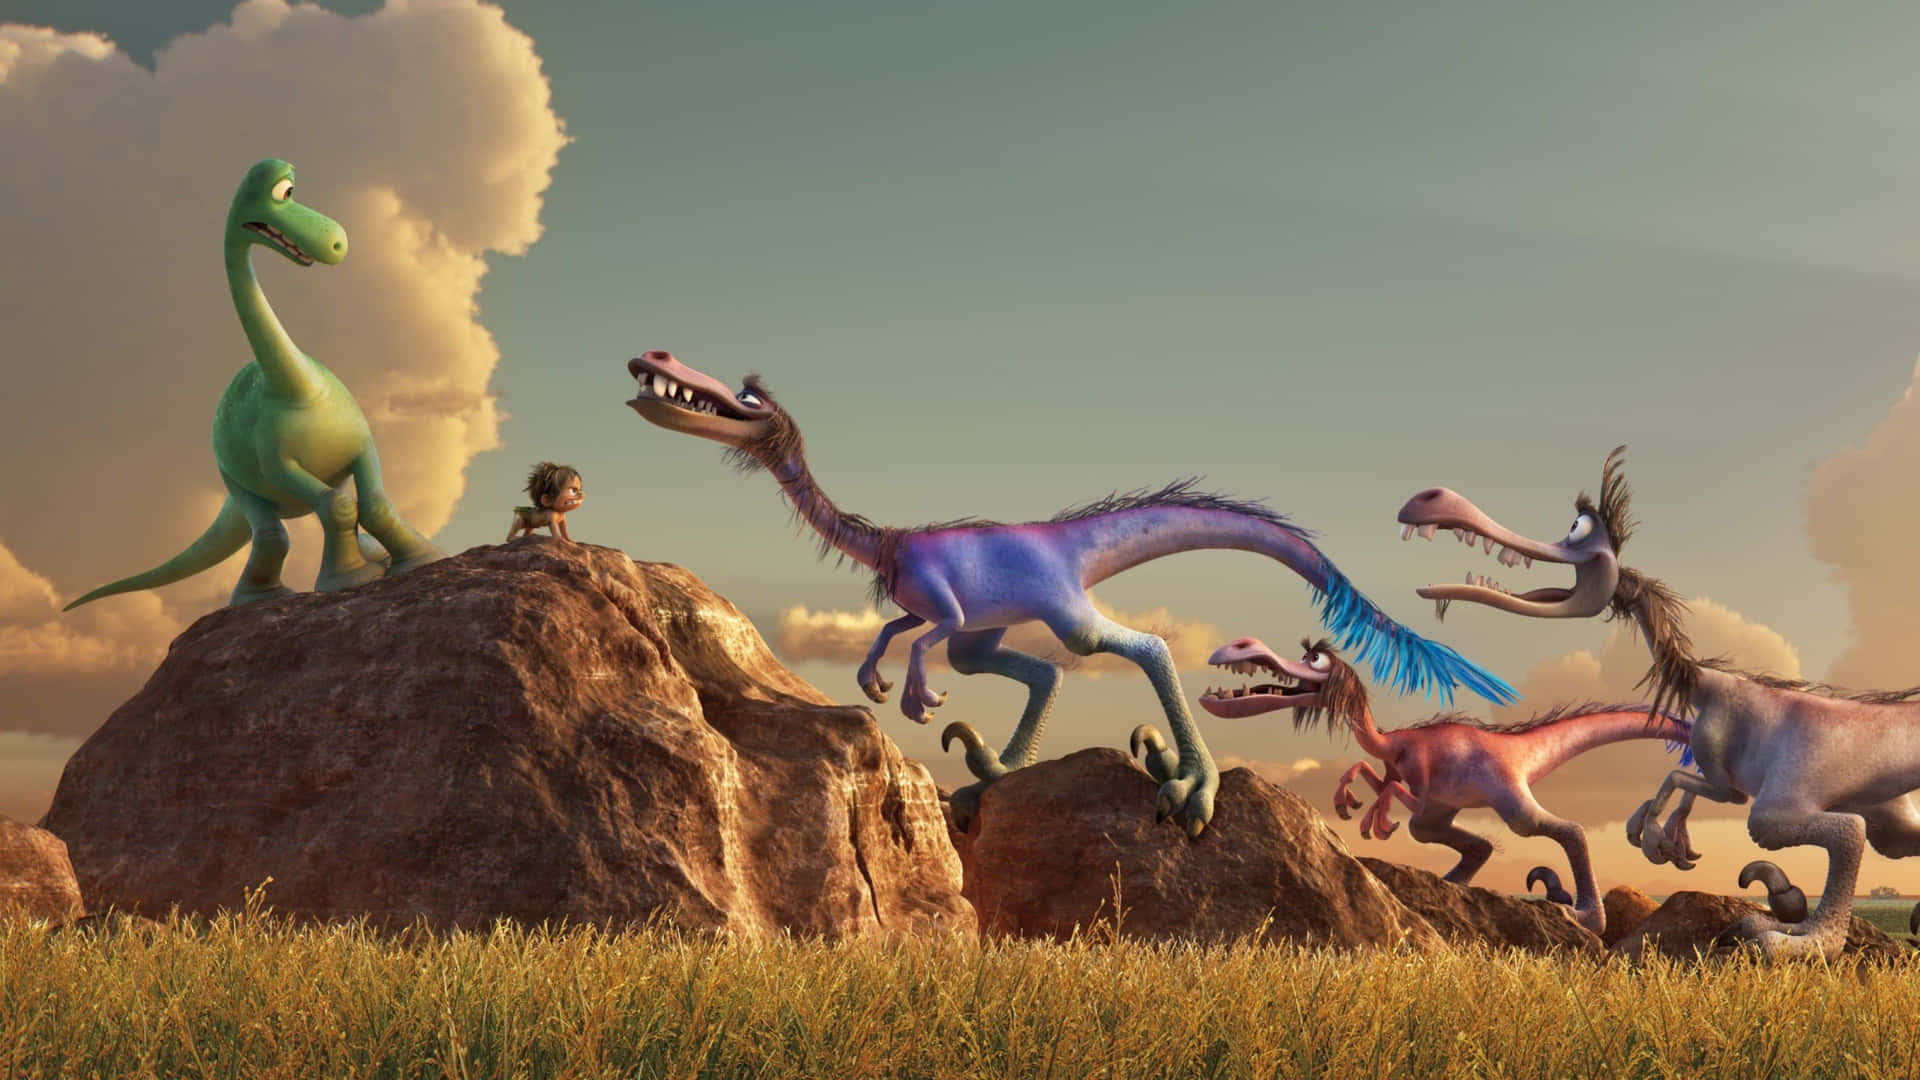 "The Ancient Magnificence of a Dinosaur"